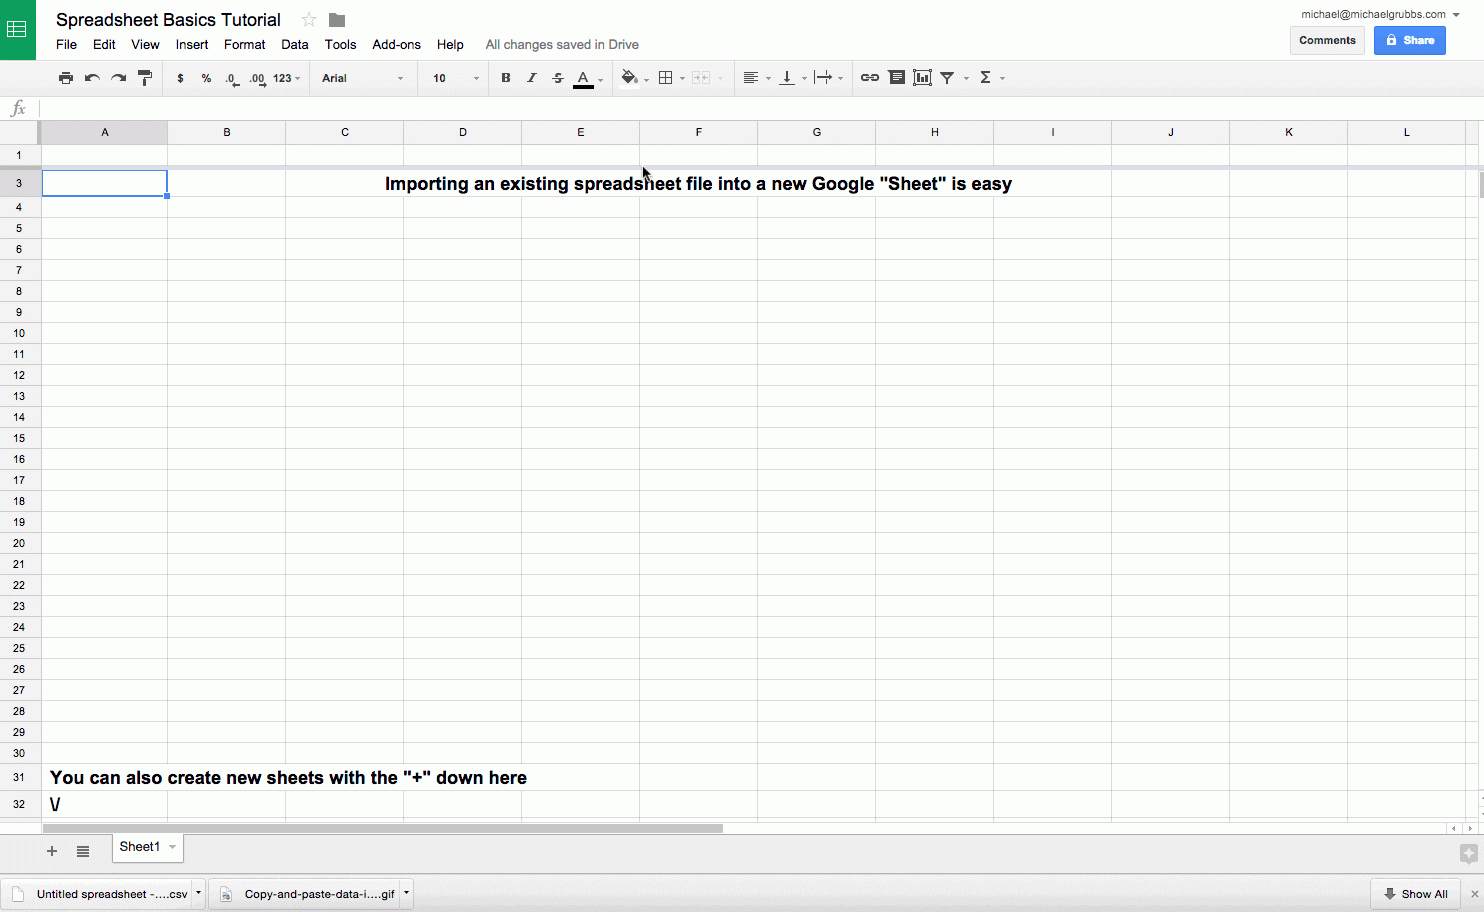 How To Make A Good Spreadsheet With Regard To Google Sheets 101: The Beginner's Guide To Online Spreadsheets  The